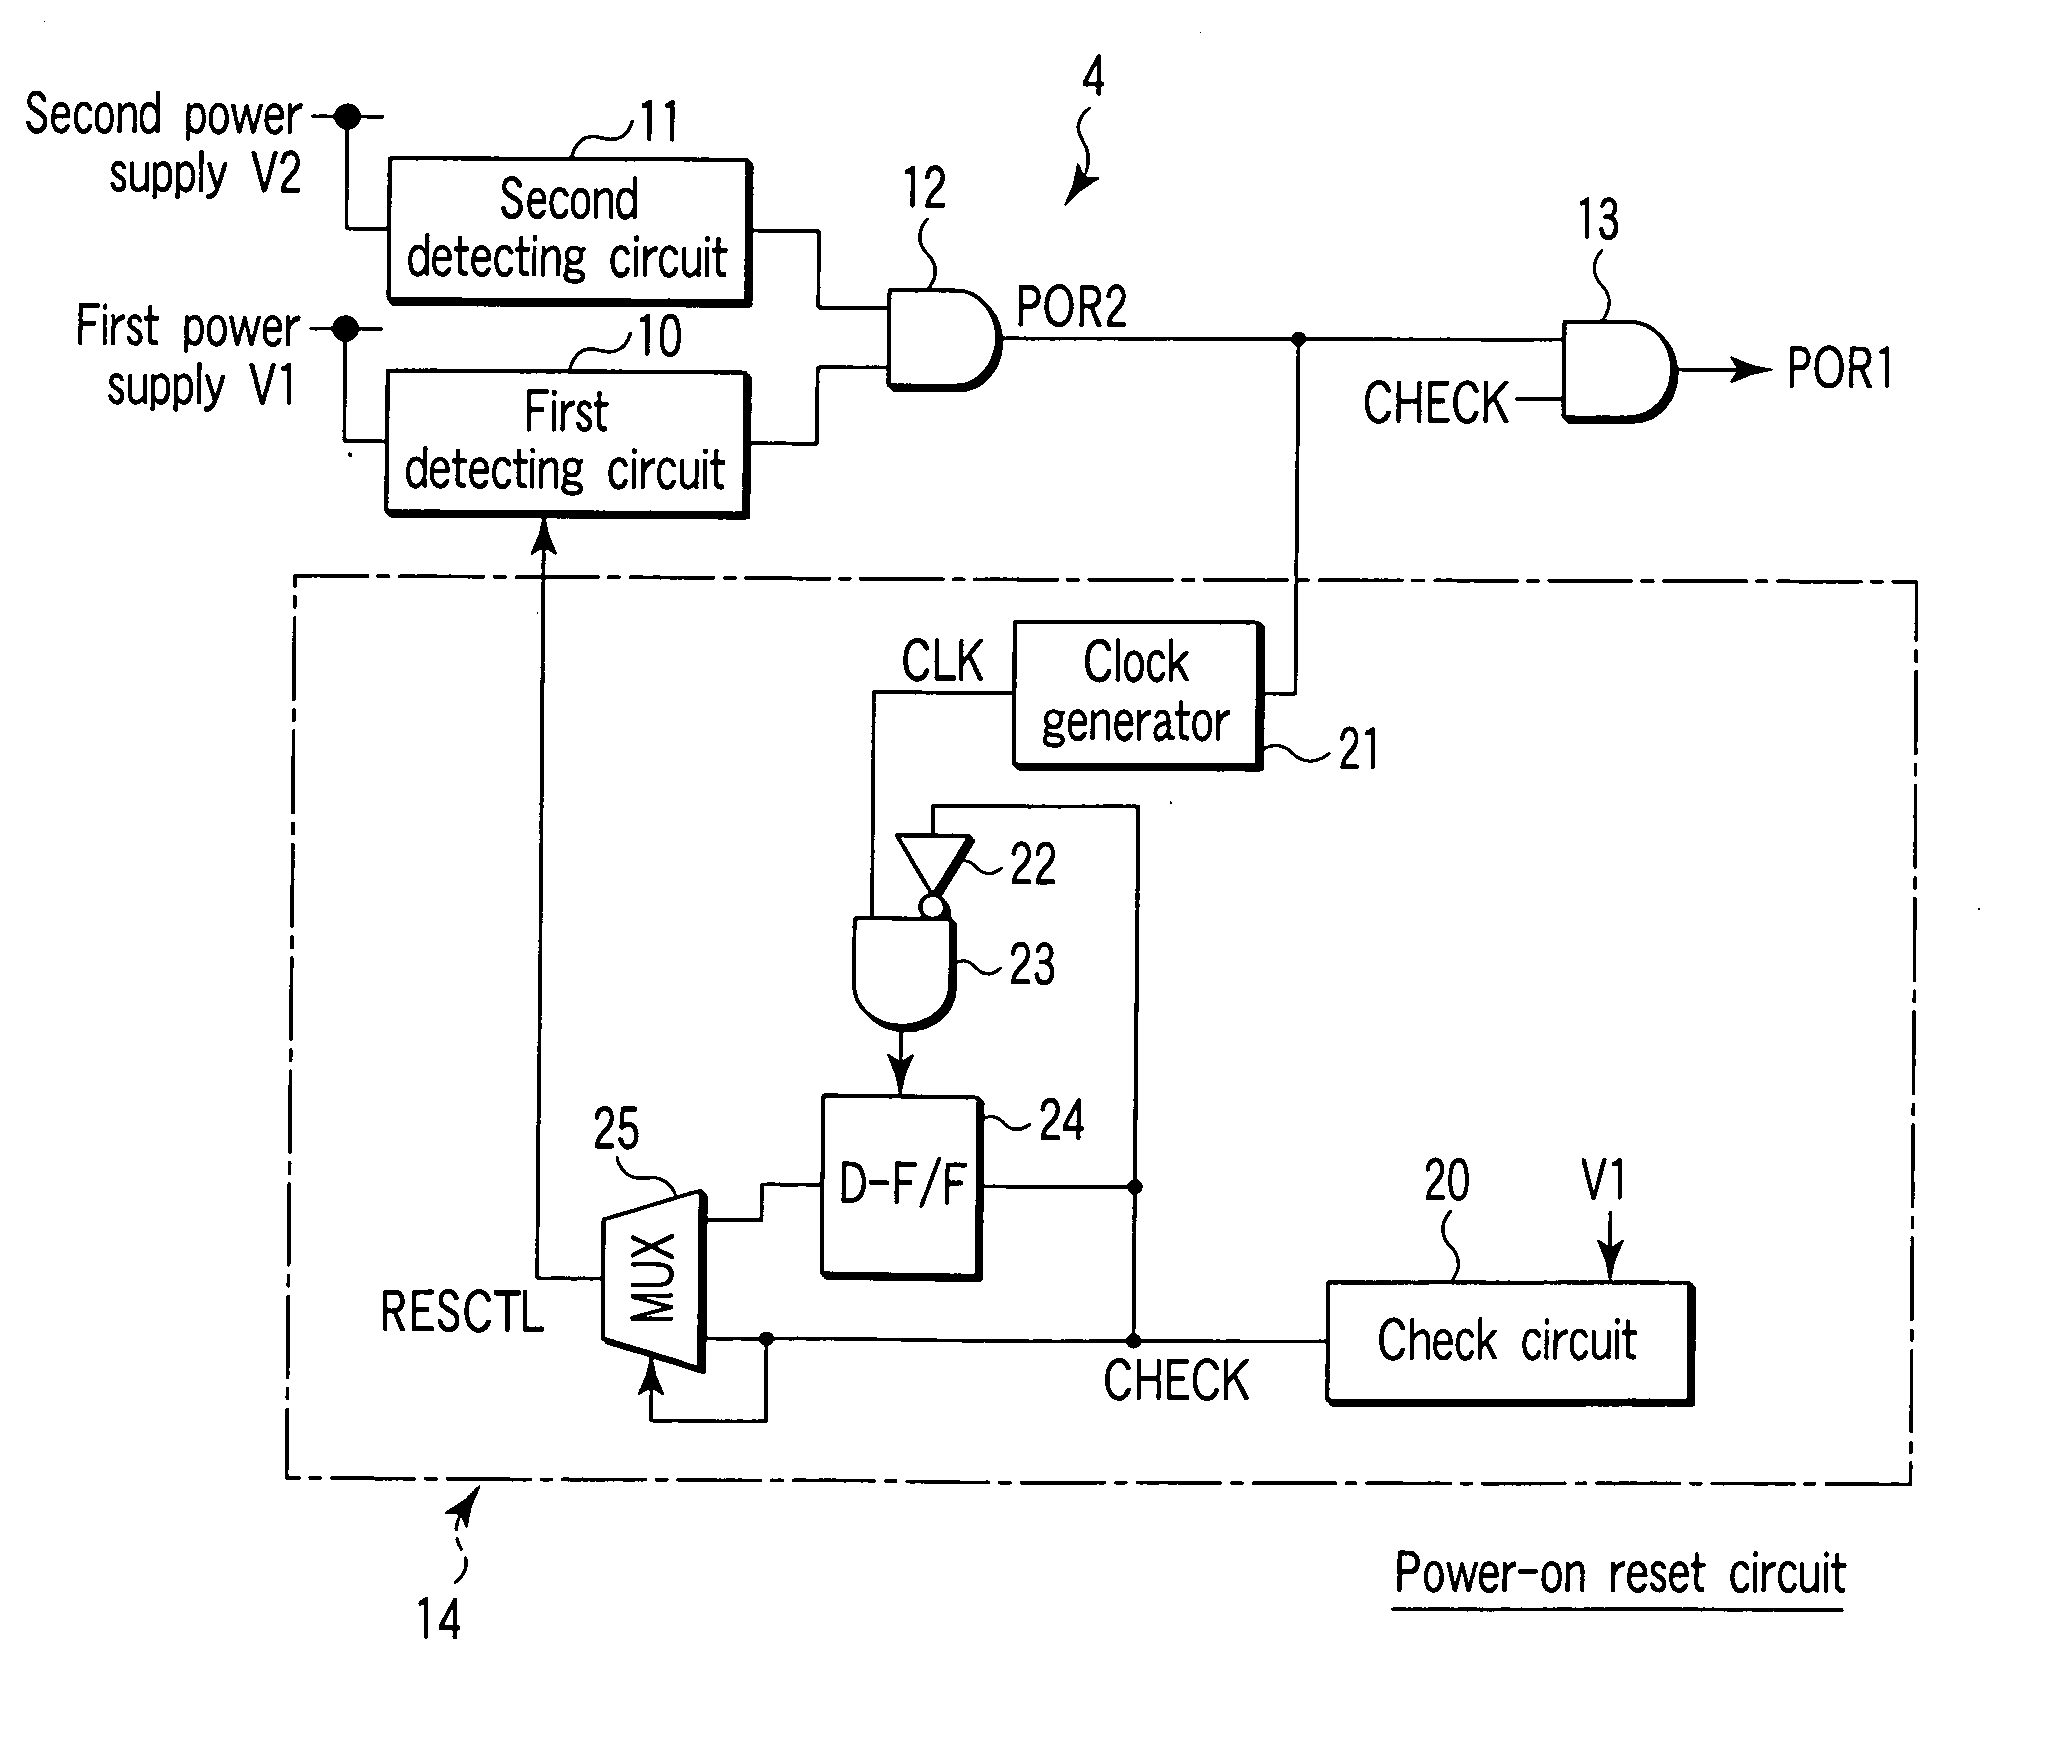 Semiconductor integrated circuit device with power-on reset circuit for detecting the operating state of an analog circuit